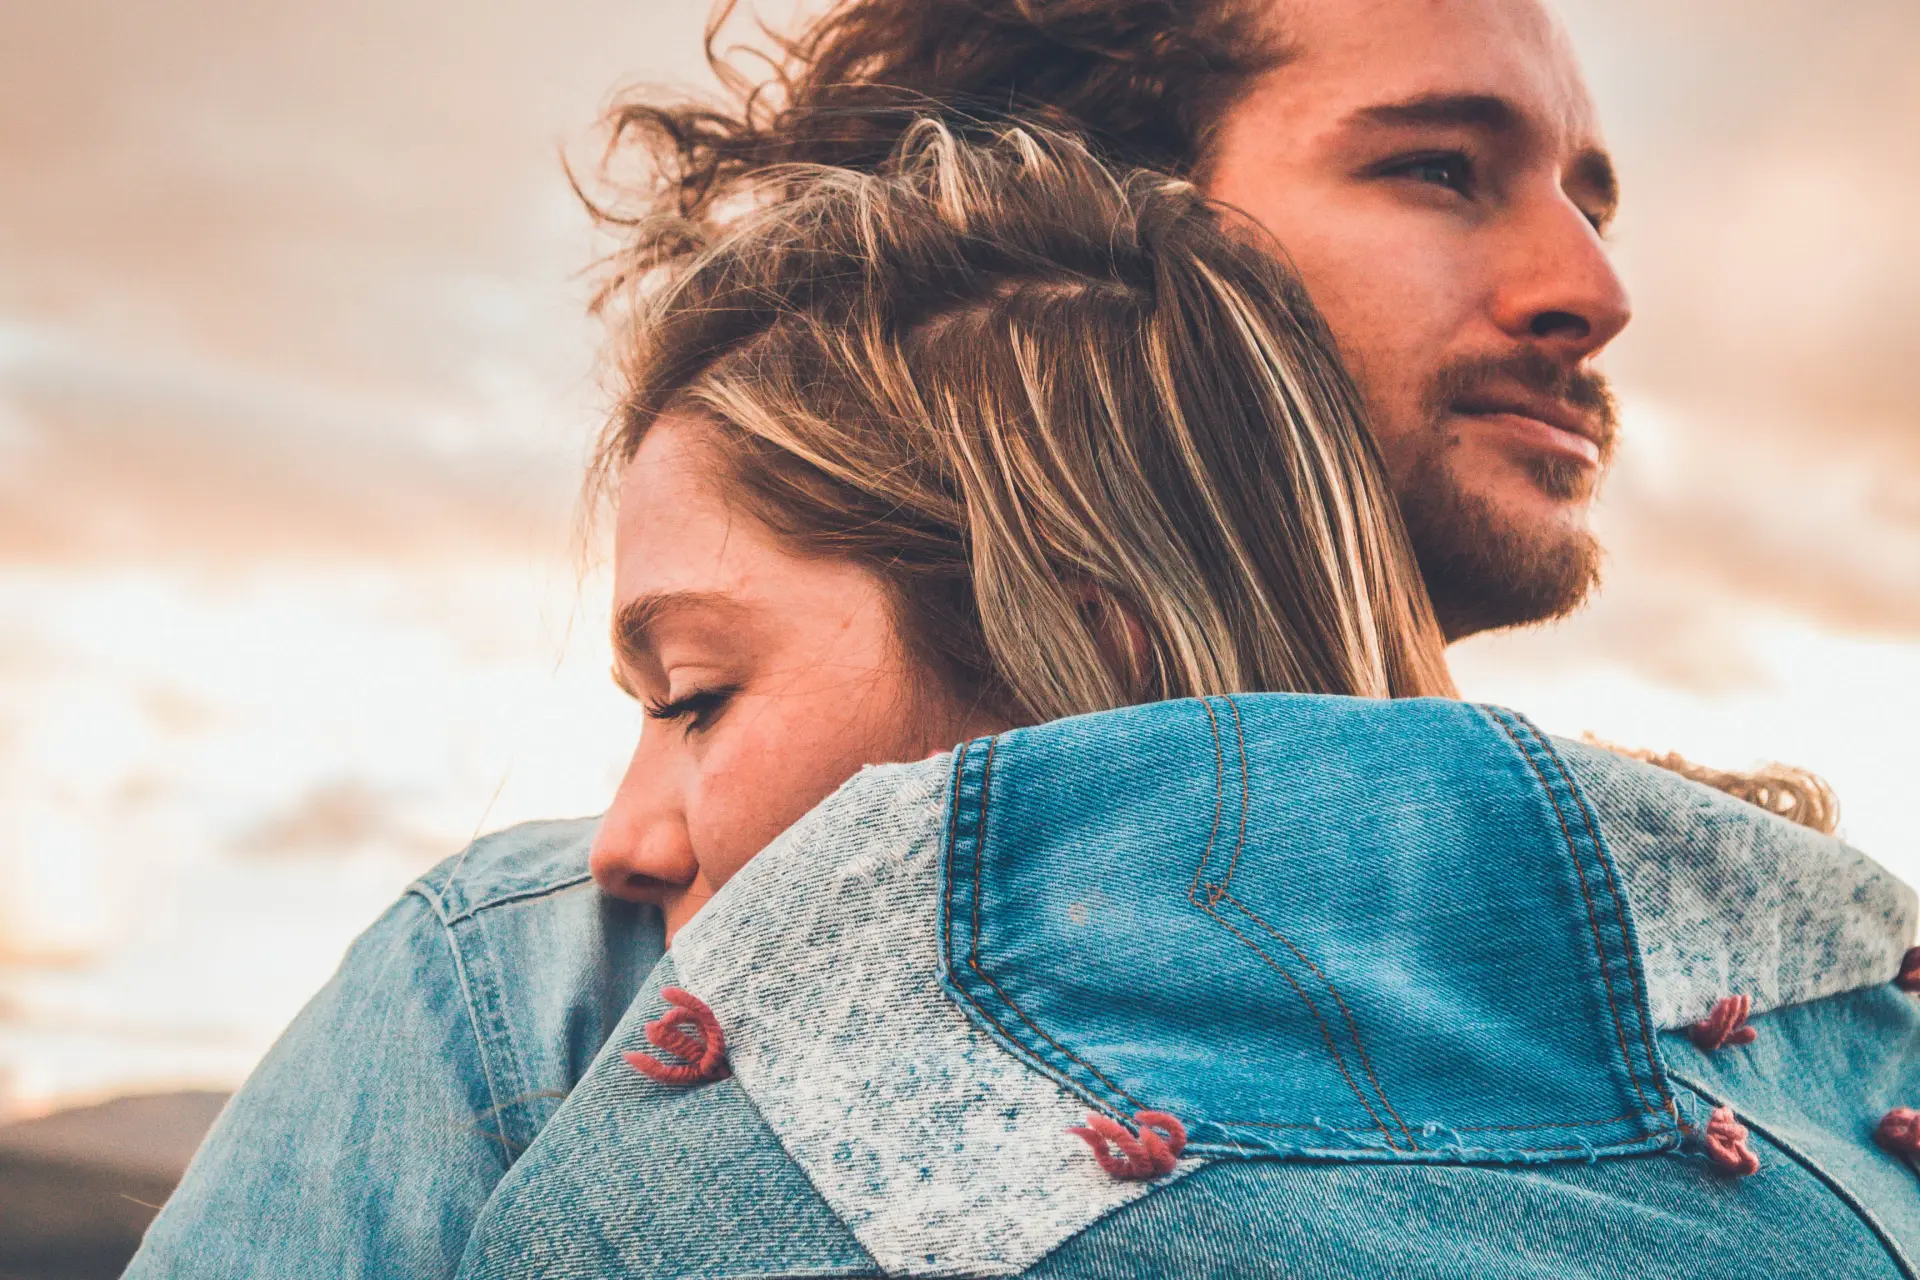 10 knowledge learned from previous relationships